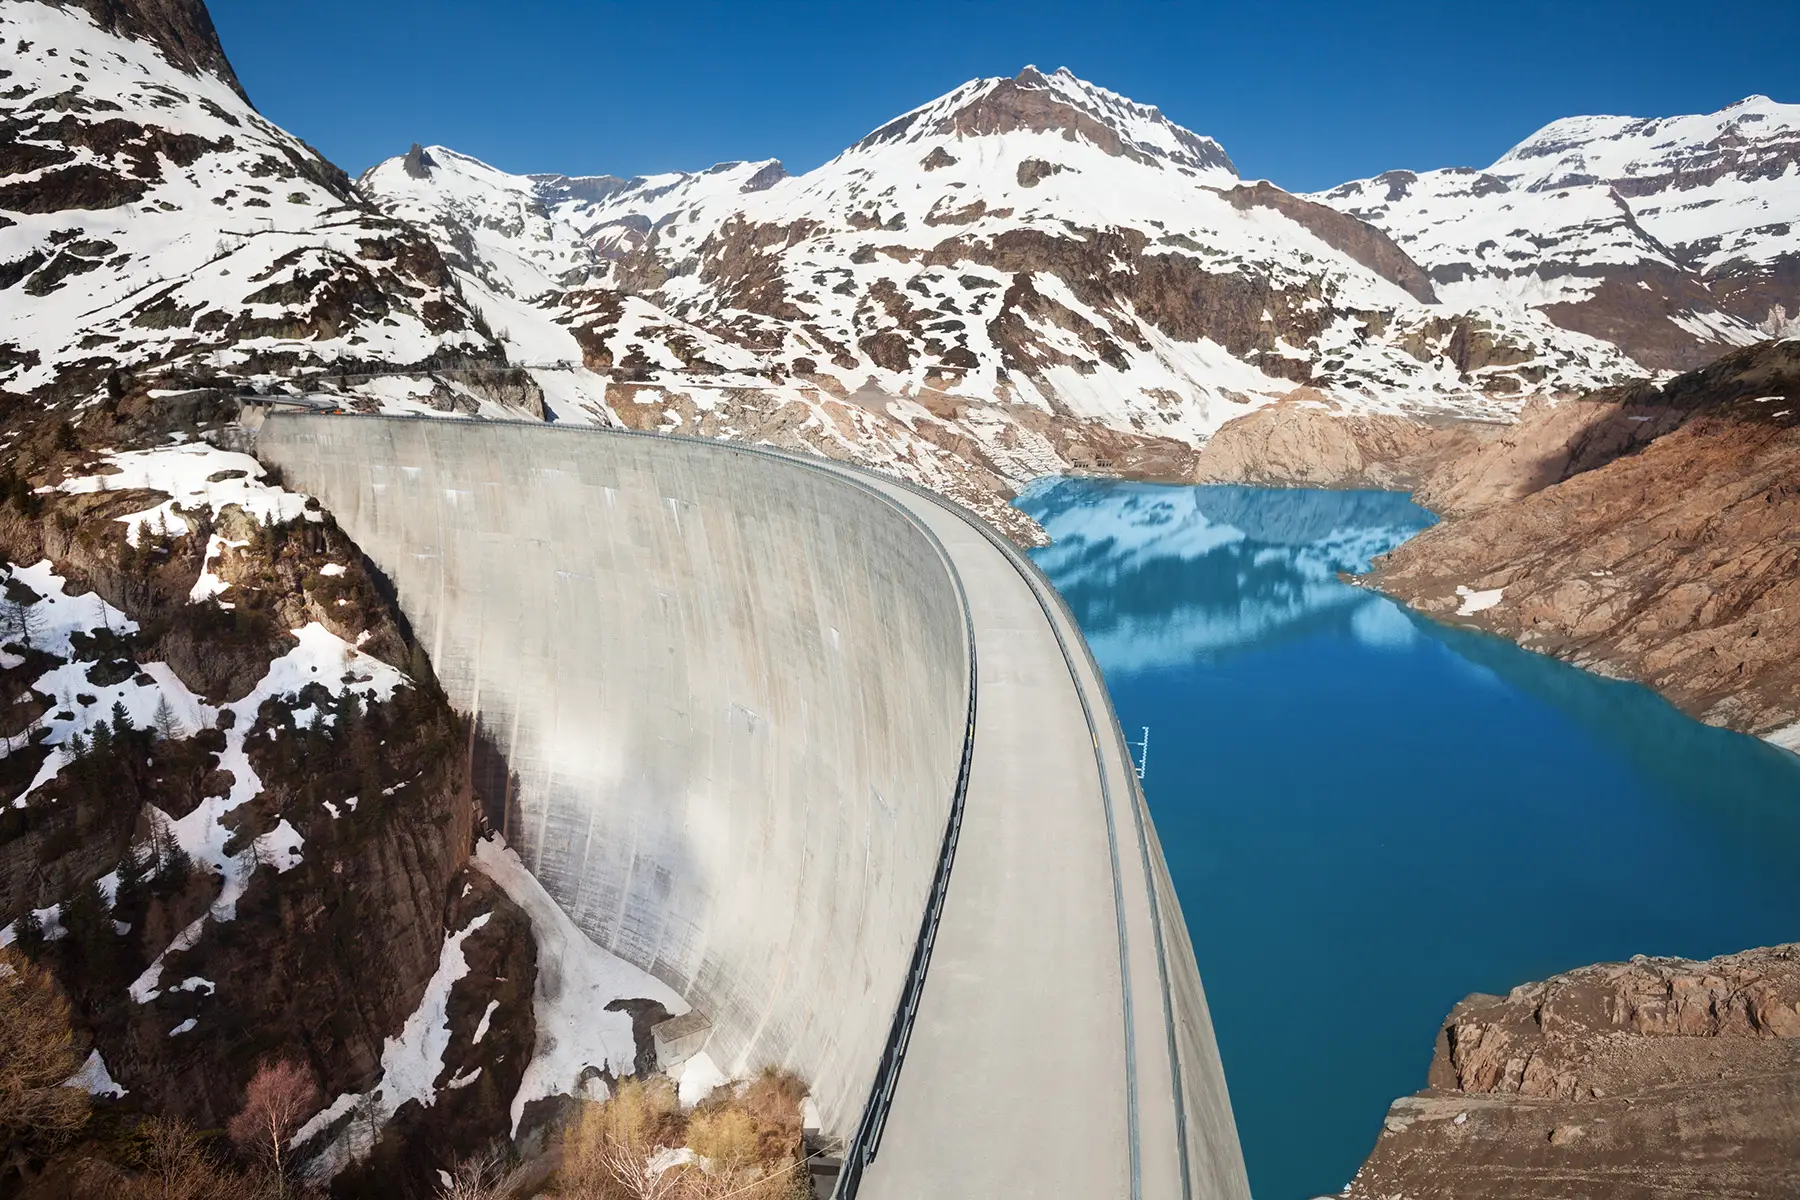 A hydroelectric dam on Lake Émosson in Switzerland